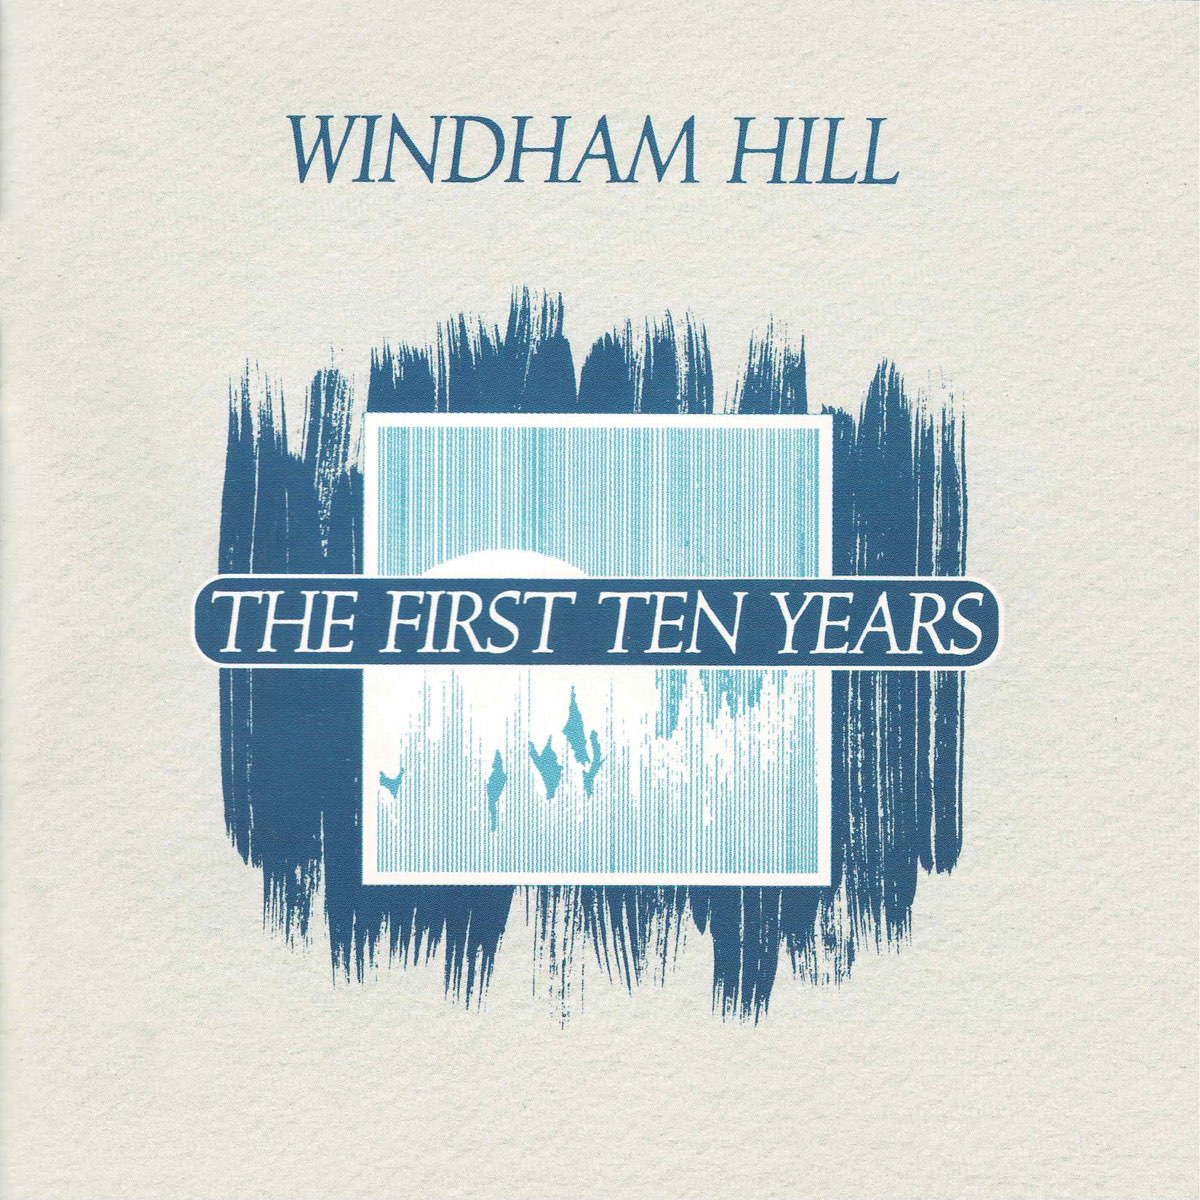 Windham Hill: The First Ten Years - Album by Various Artists